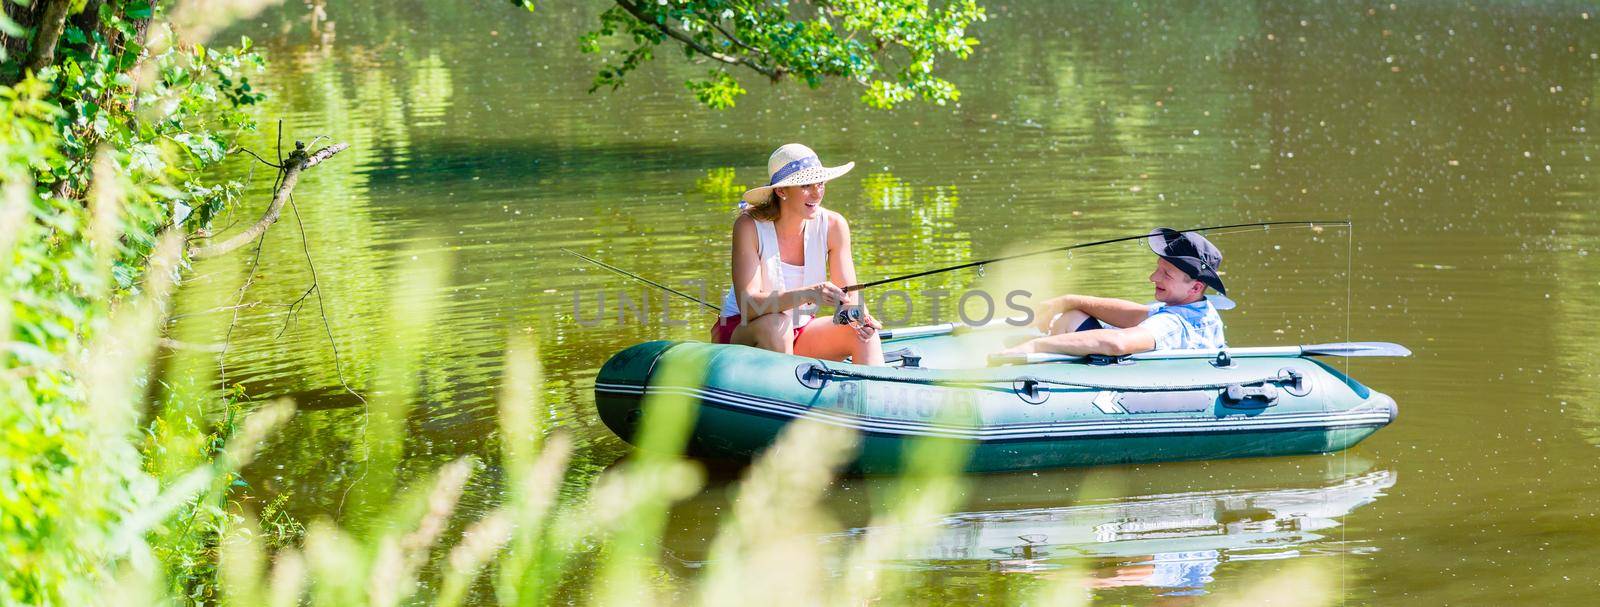 Couple in boat on pond or lake fishing by Kzenon